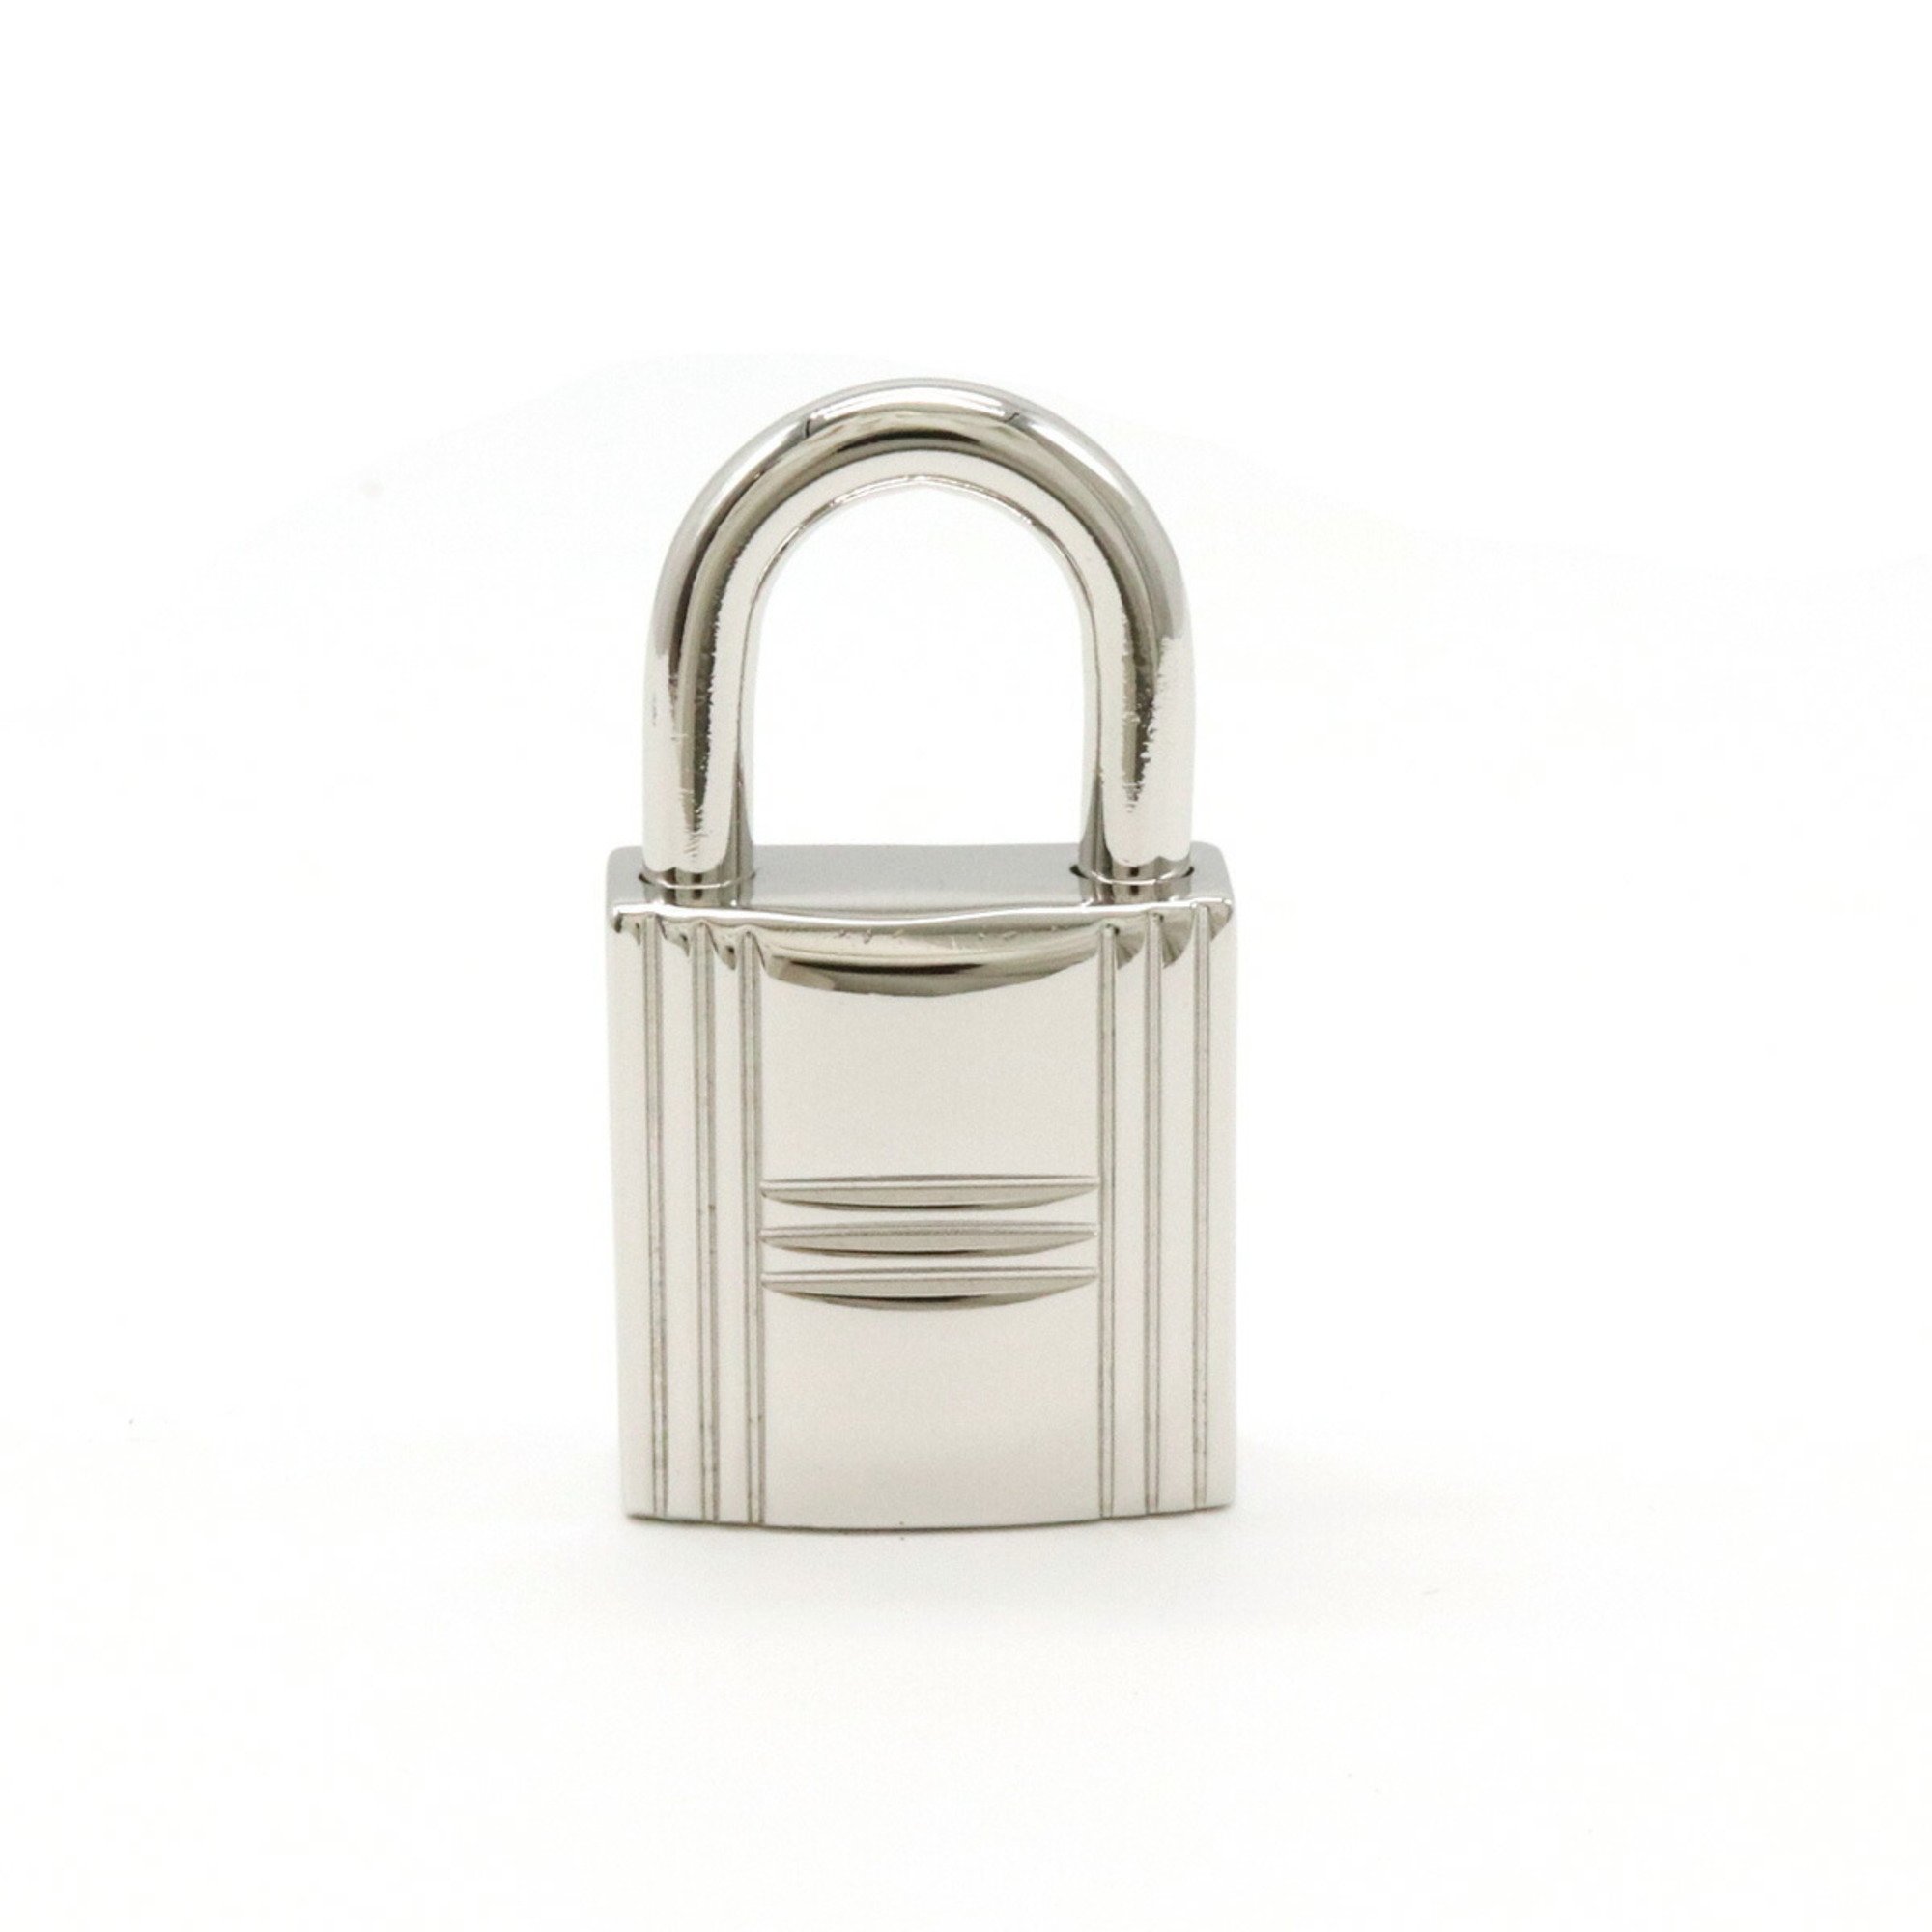 HERMES Padlock No. 107 with Key Silver Color